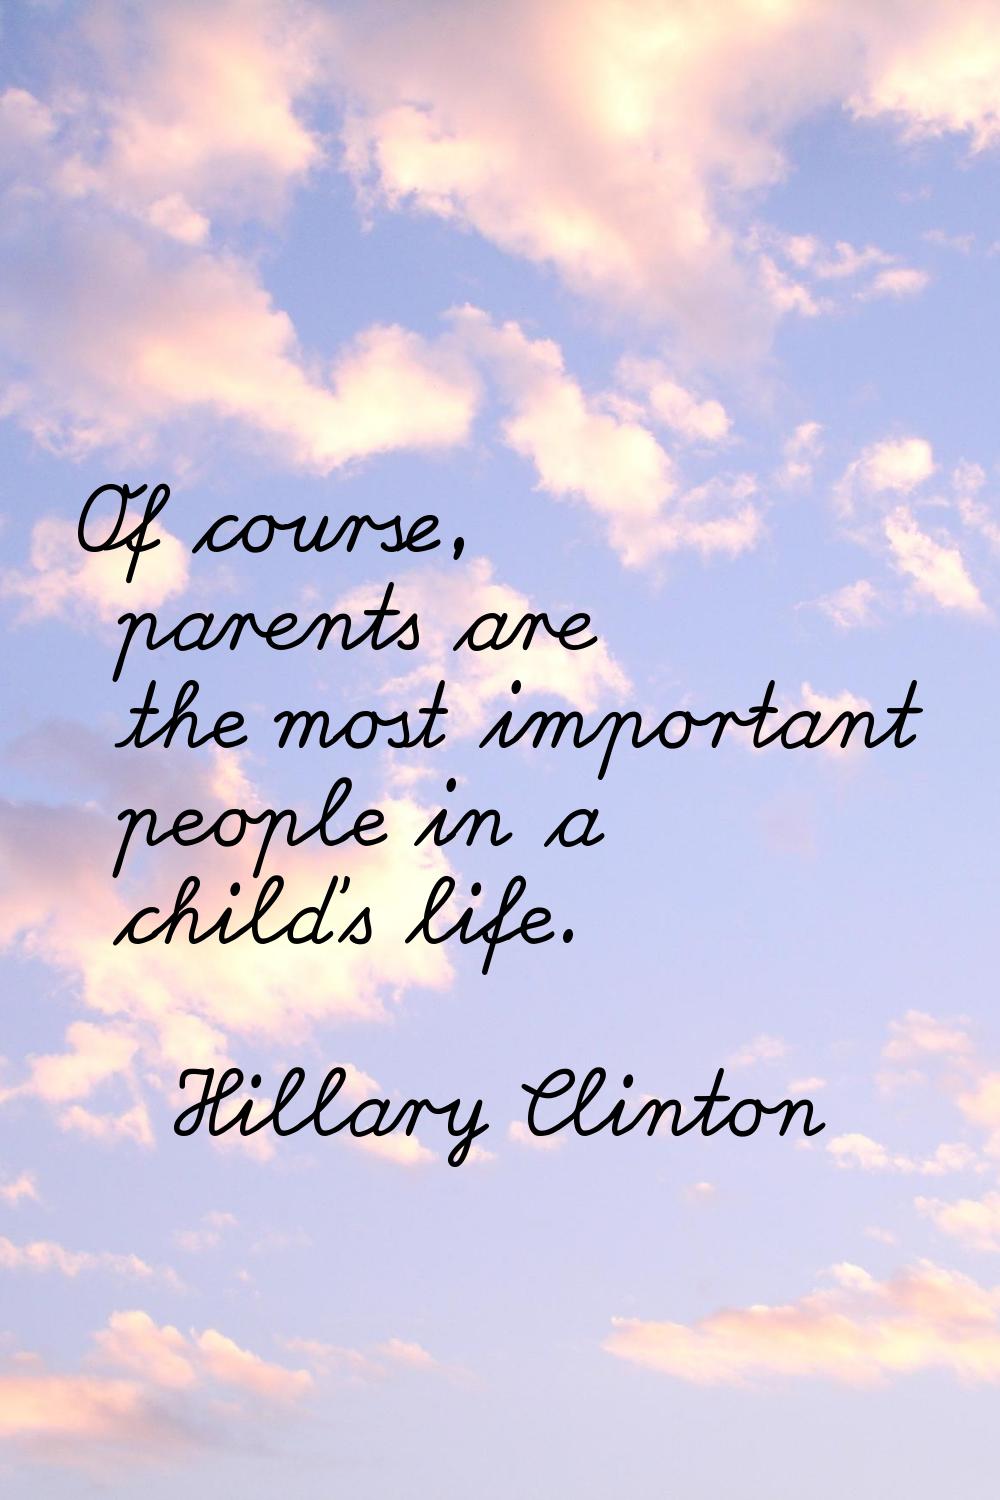 Of course, parents are the most important people in a child's life.